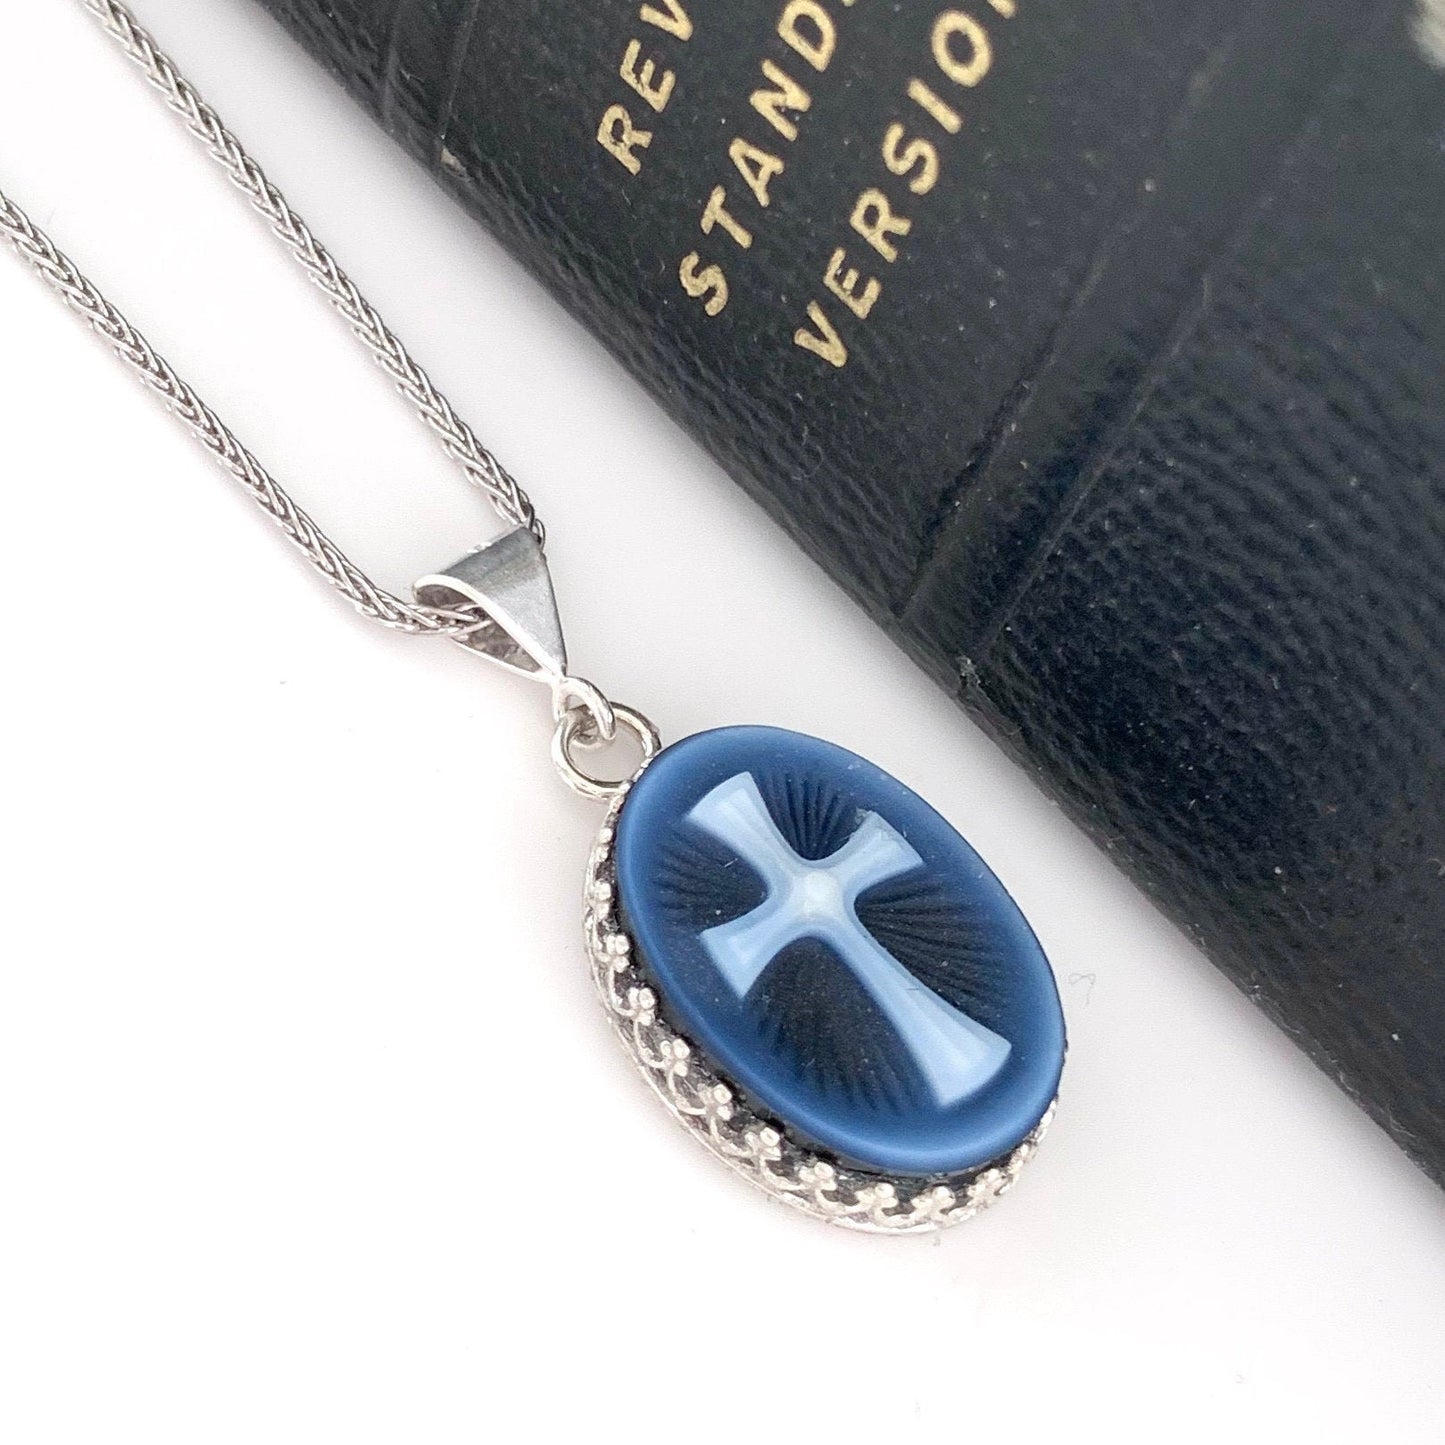 Dainty Cross Cameo Necklace, Christian Jewelry, Religious Jewelry, Unique Gifts for Women